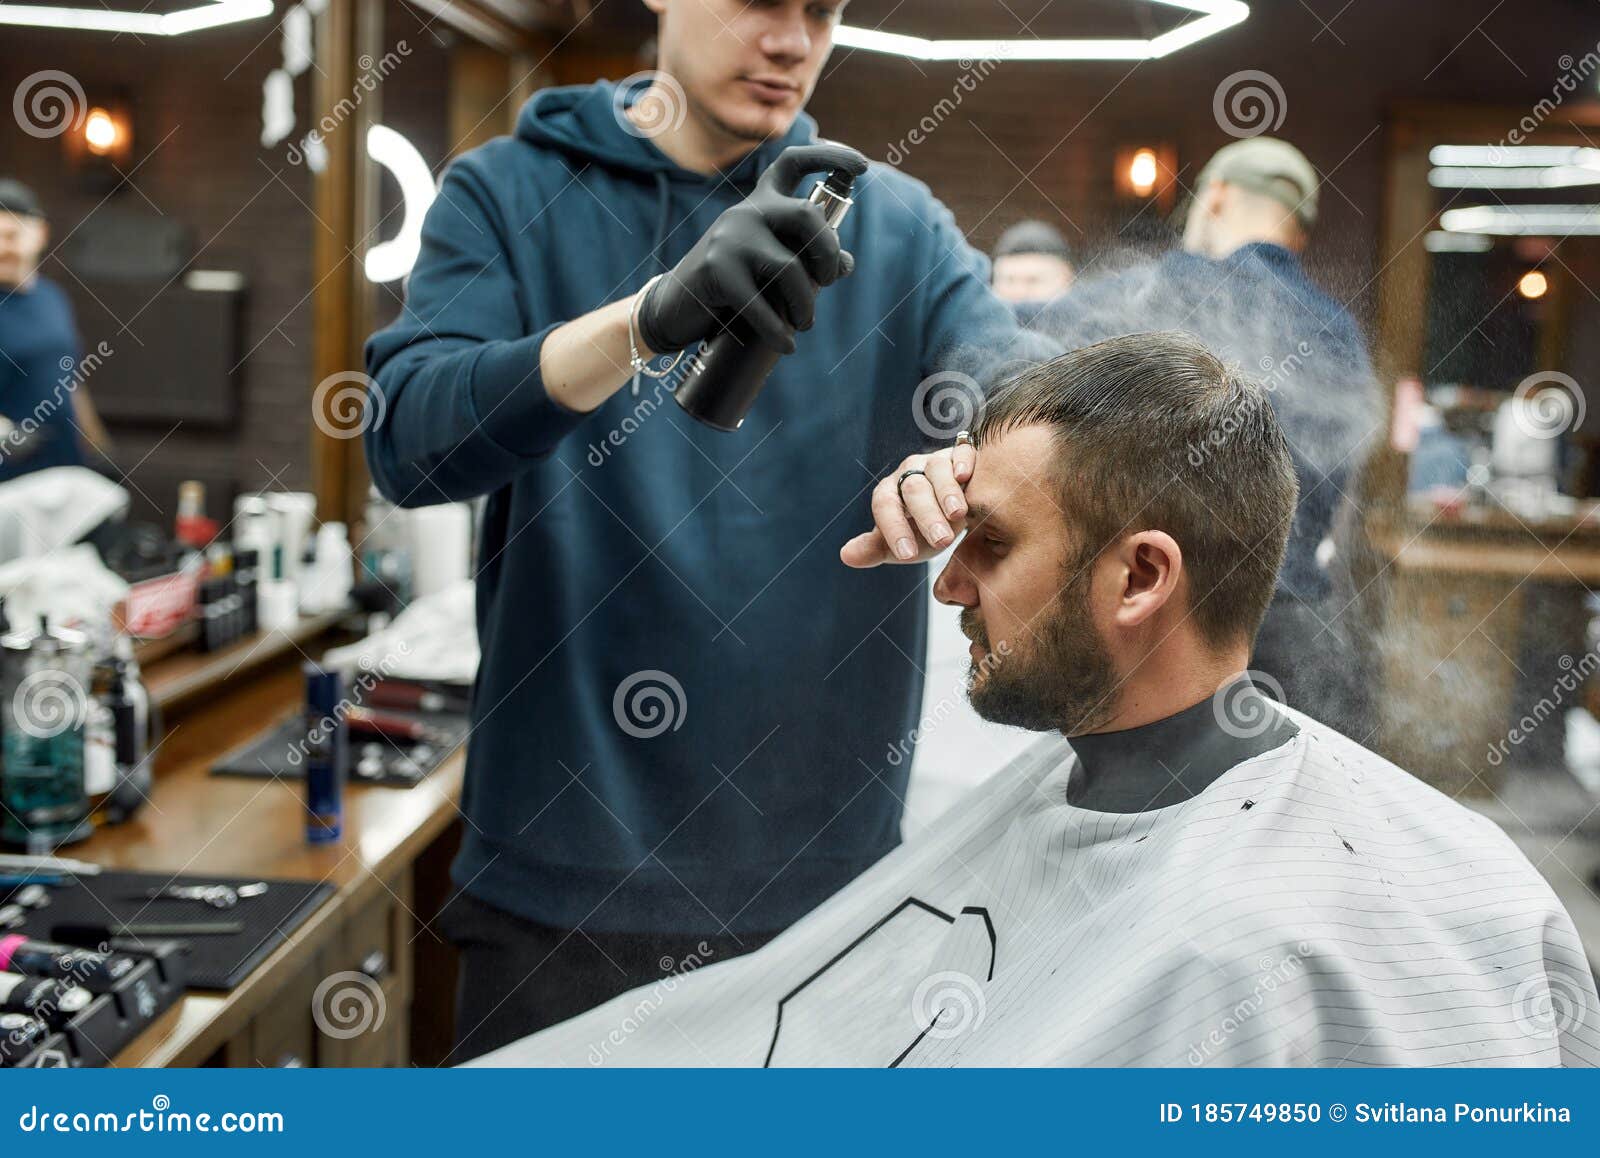 Finishing Touch. Barber Fixing with Hairspray New Haircut of Young Bearded  Man Sitting in Barber Shop Chair Stock Photo - Image of fixing, chair:  185749850